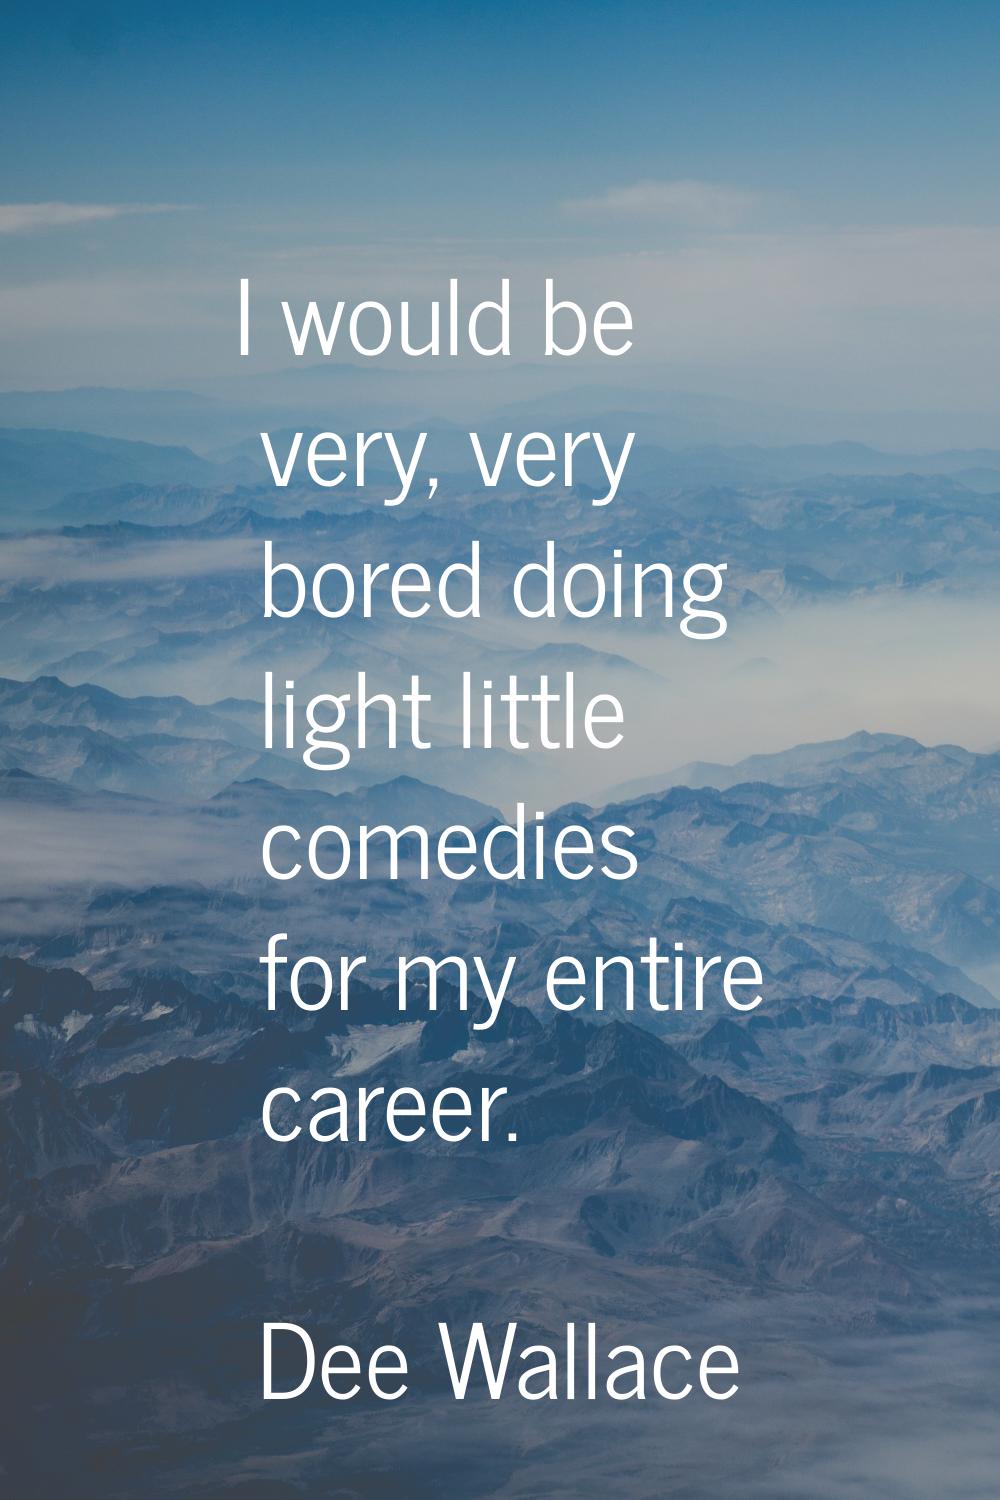 I would be very, very bored doing light little comedies for my entire career.